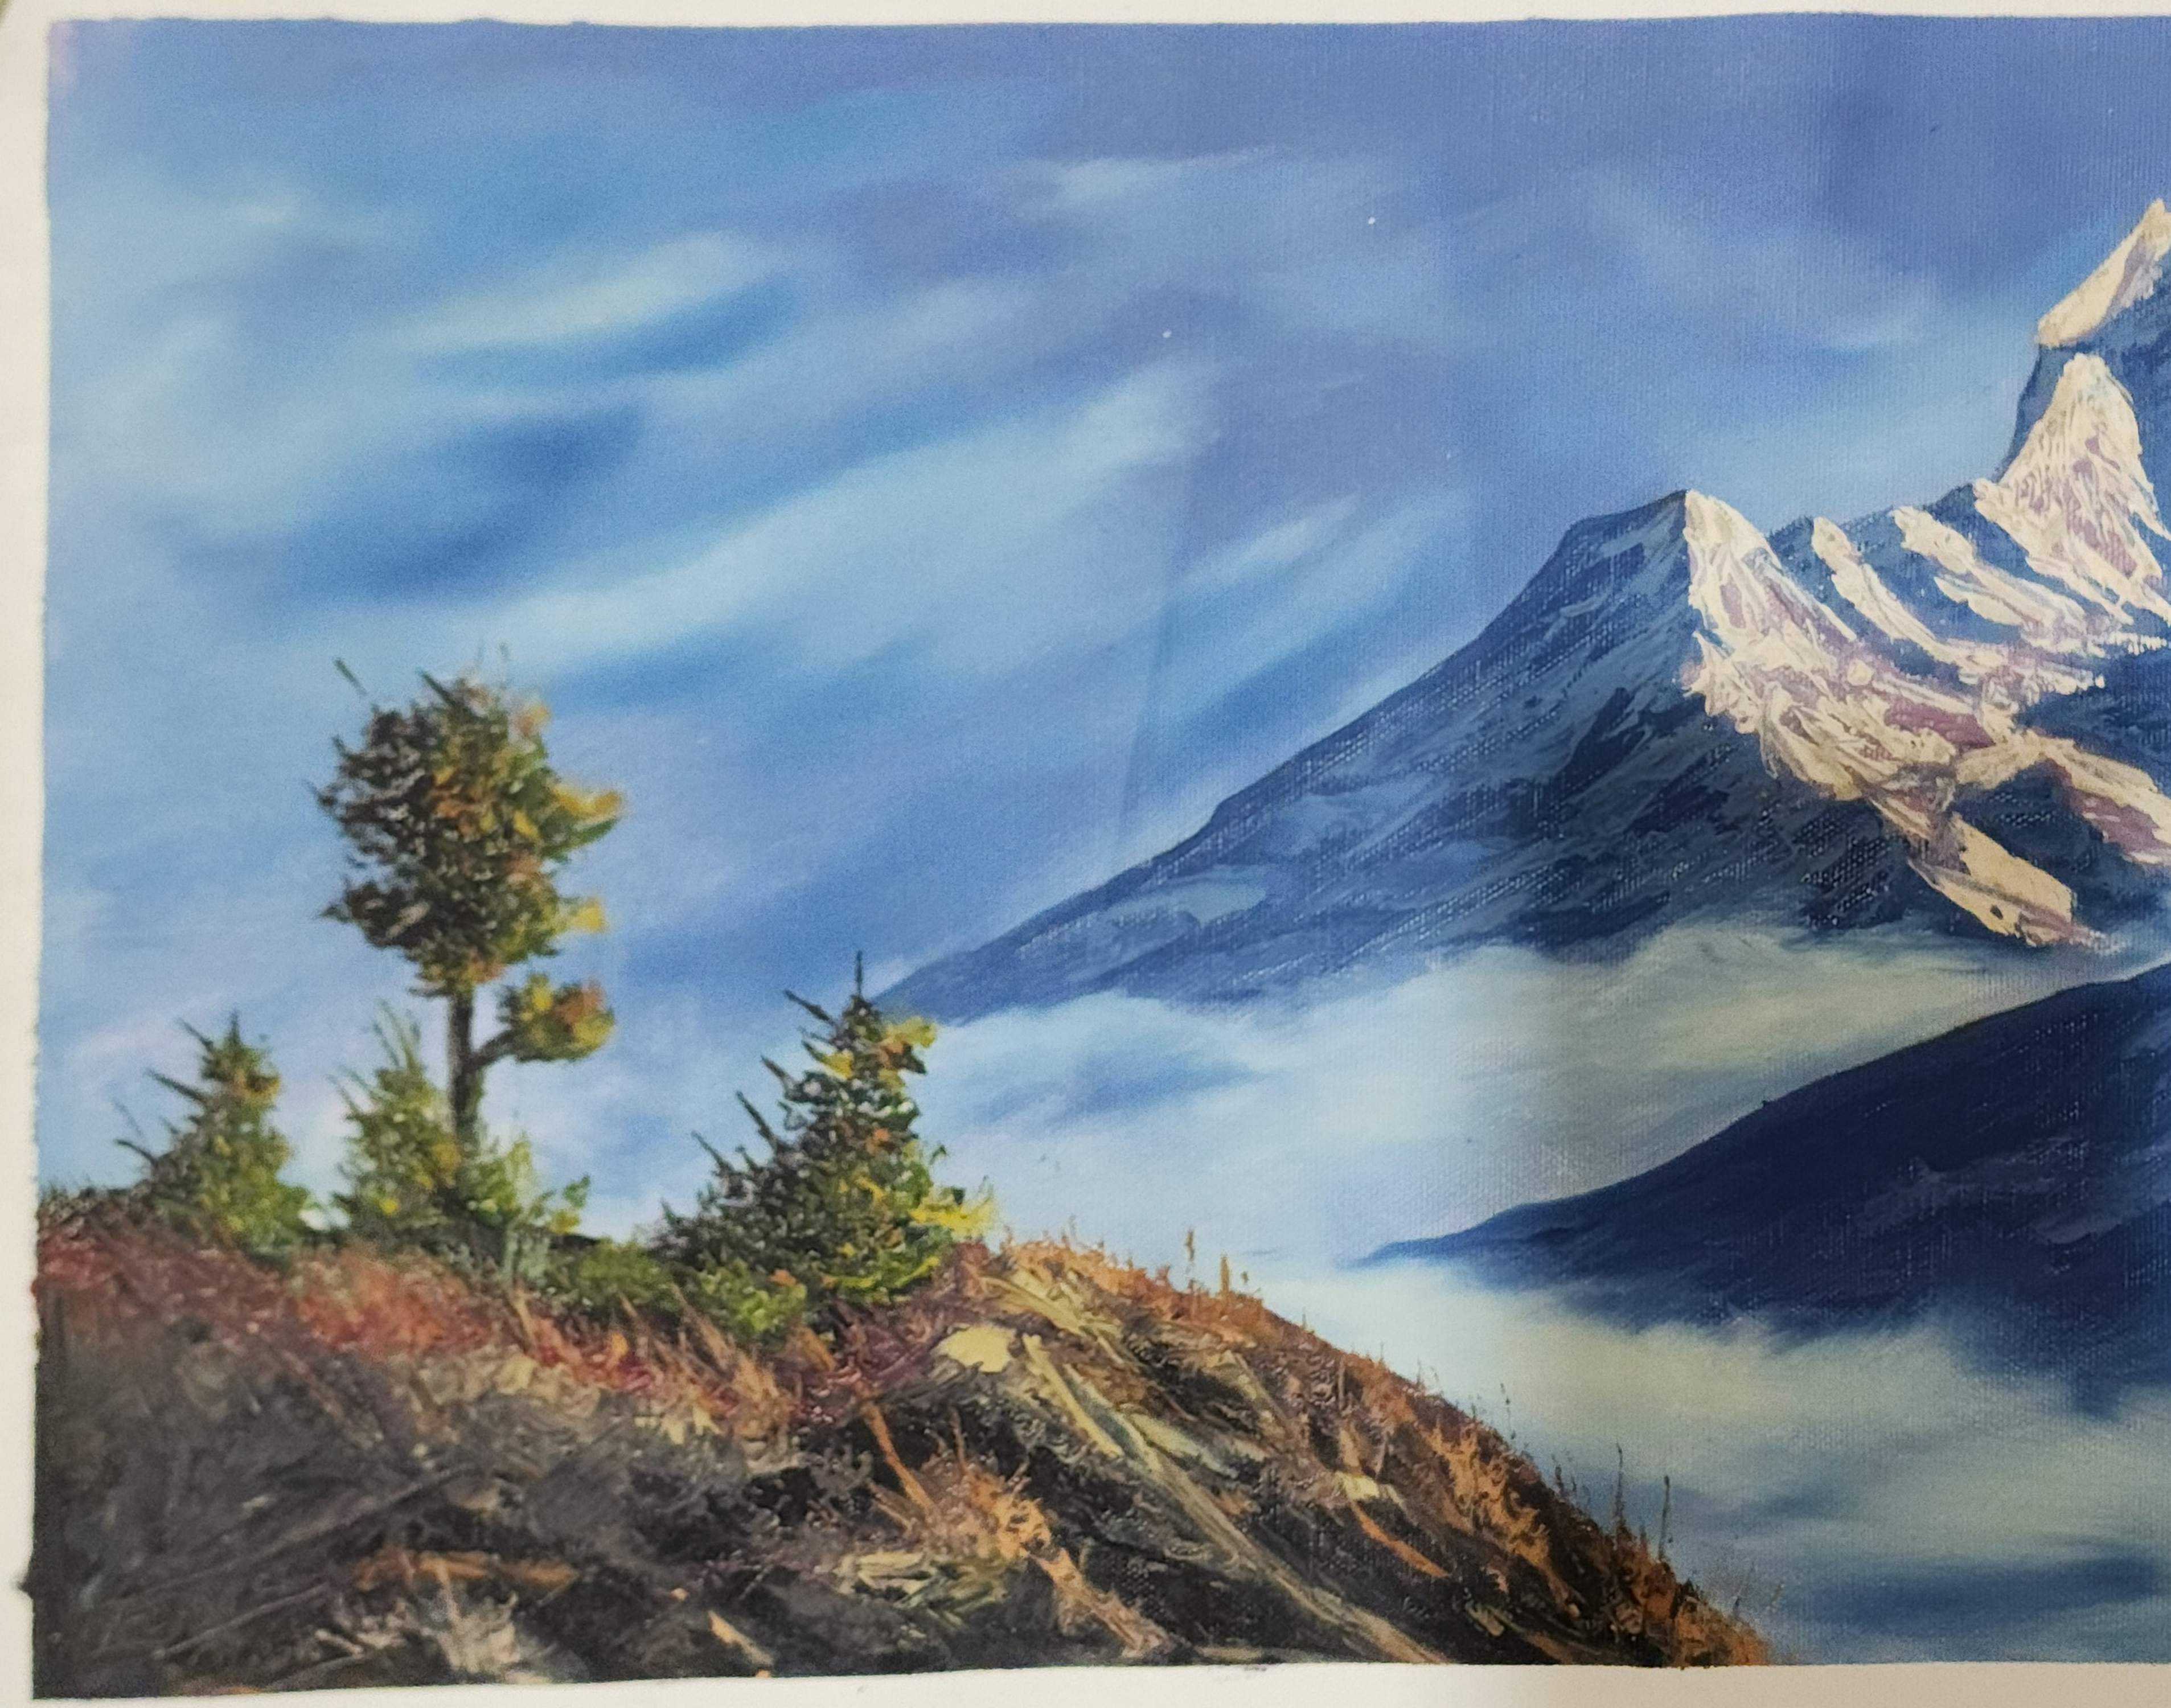 Mount Everest Painting, Hand Painted